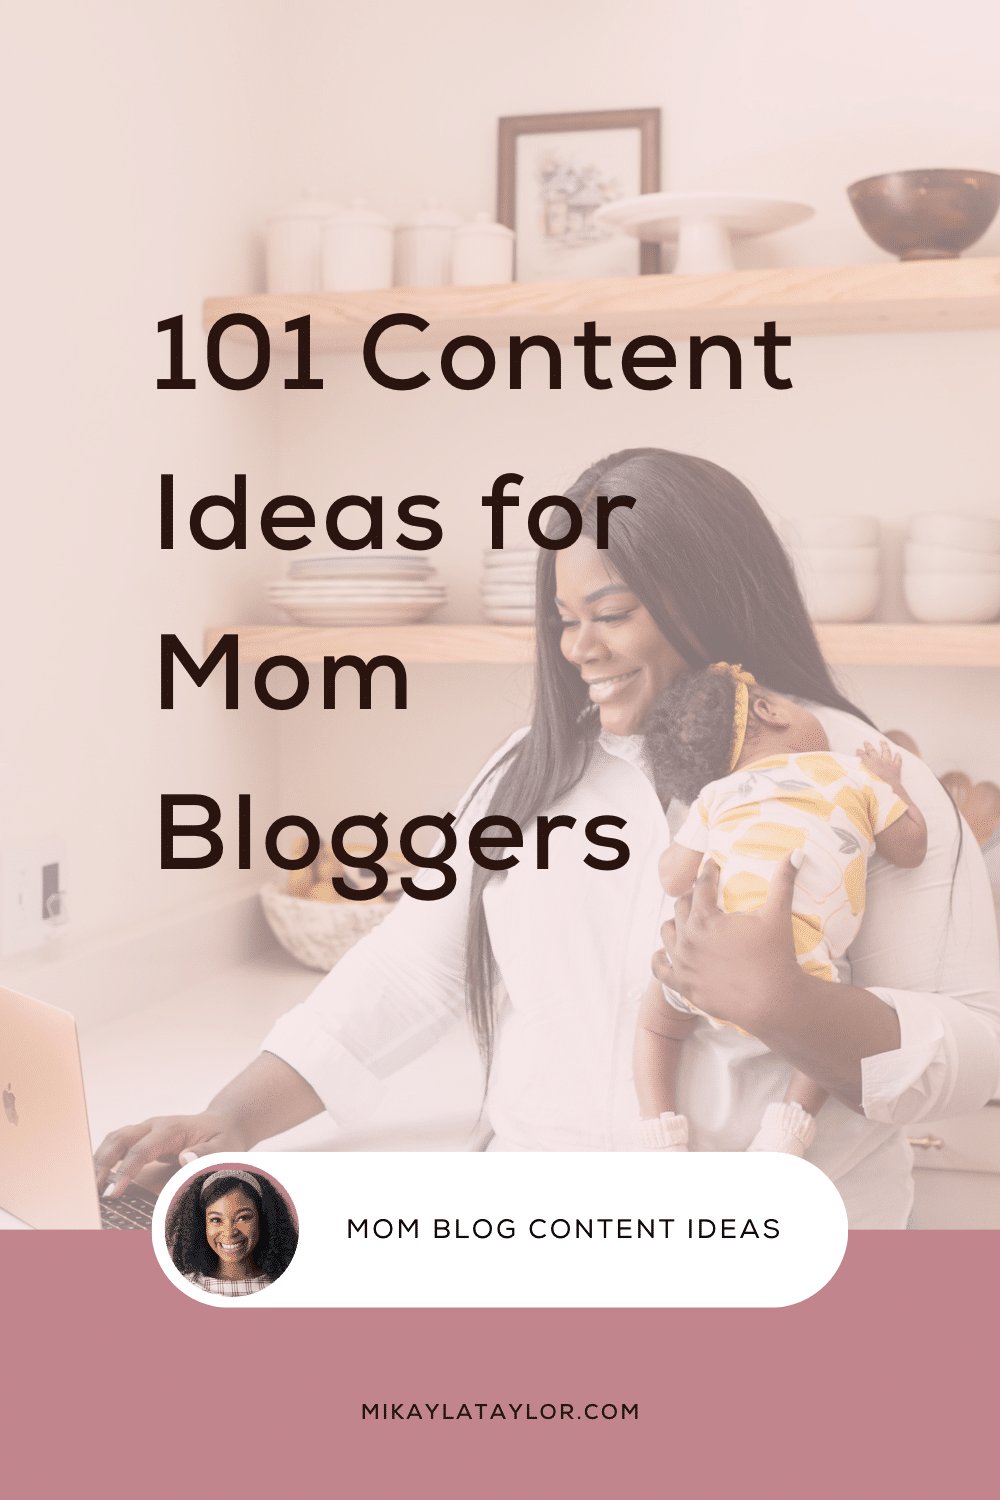 101 Blog Post Ideas for Mom Bloggers - in on Pinterest!